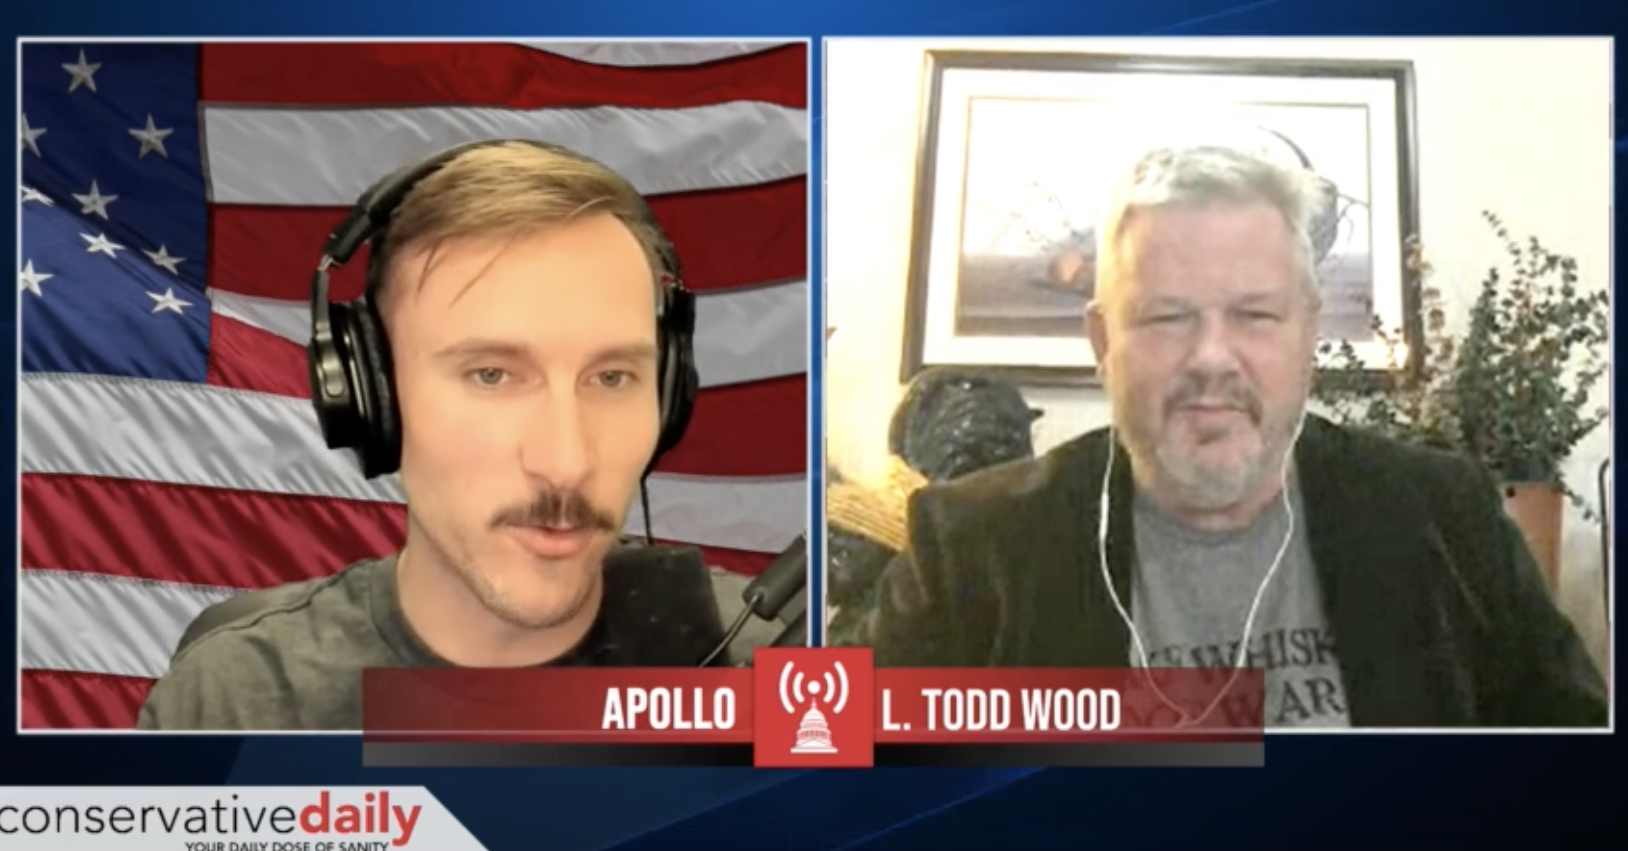 Conservative Daily: L. Todd Wood Drops Insights On Economic Crisis, Future Of Energy In US and EU, War Posturing With Russia